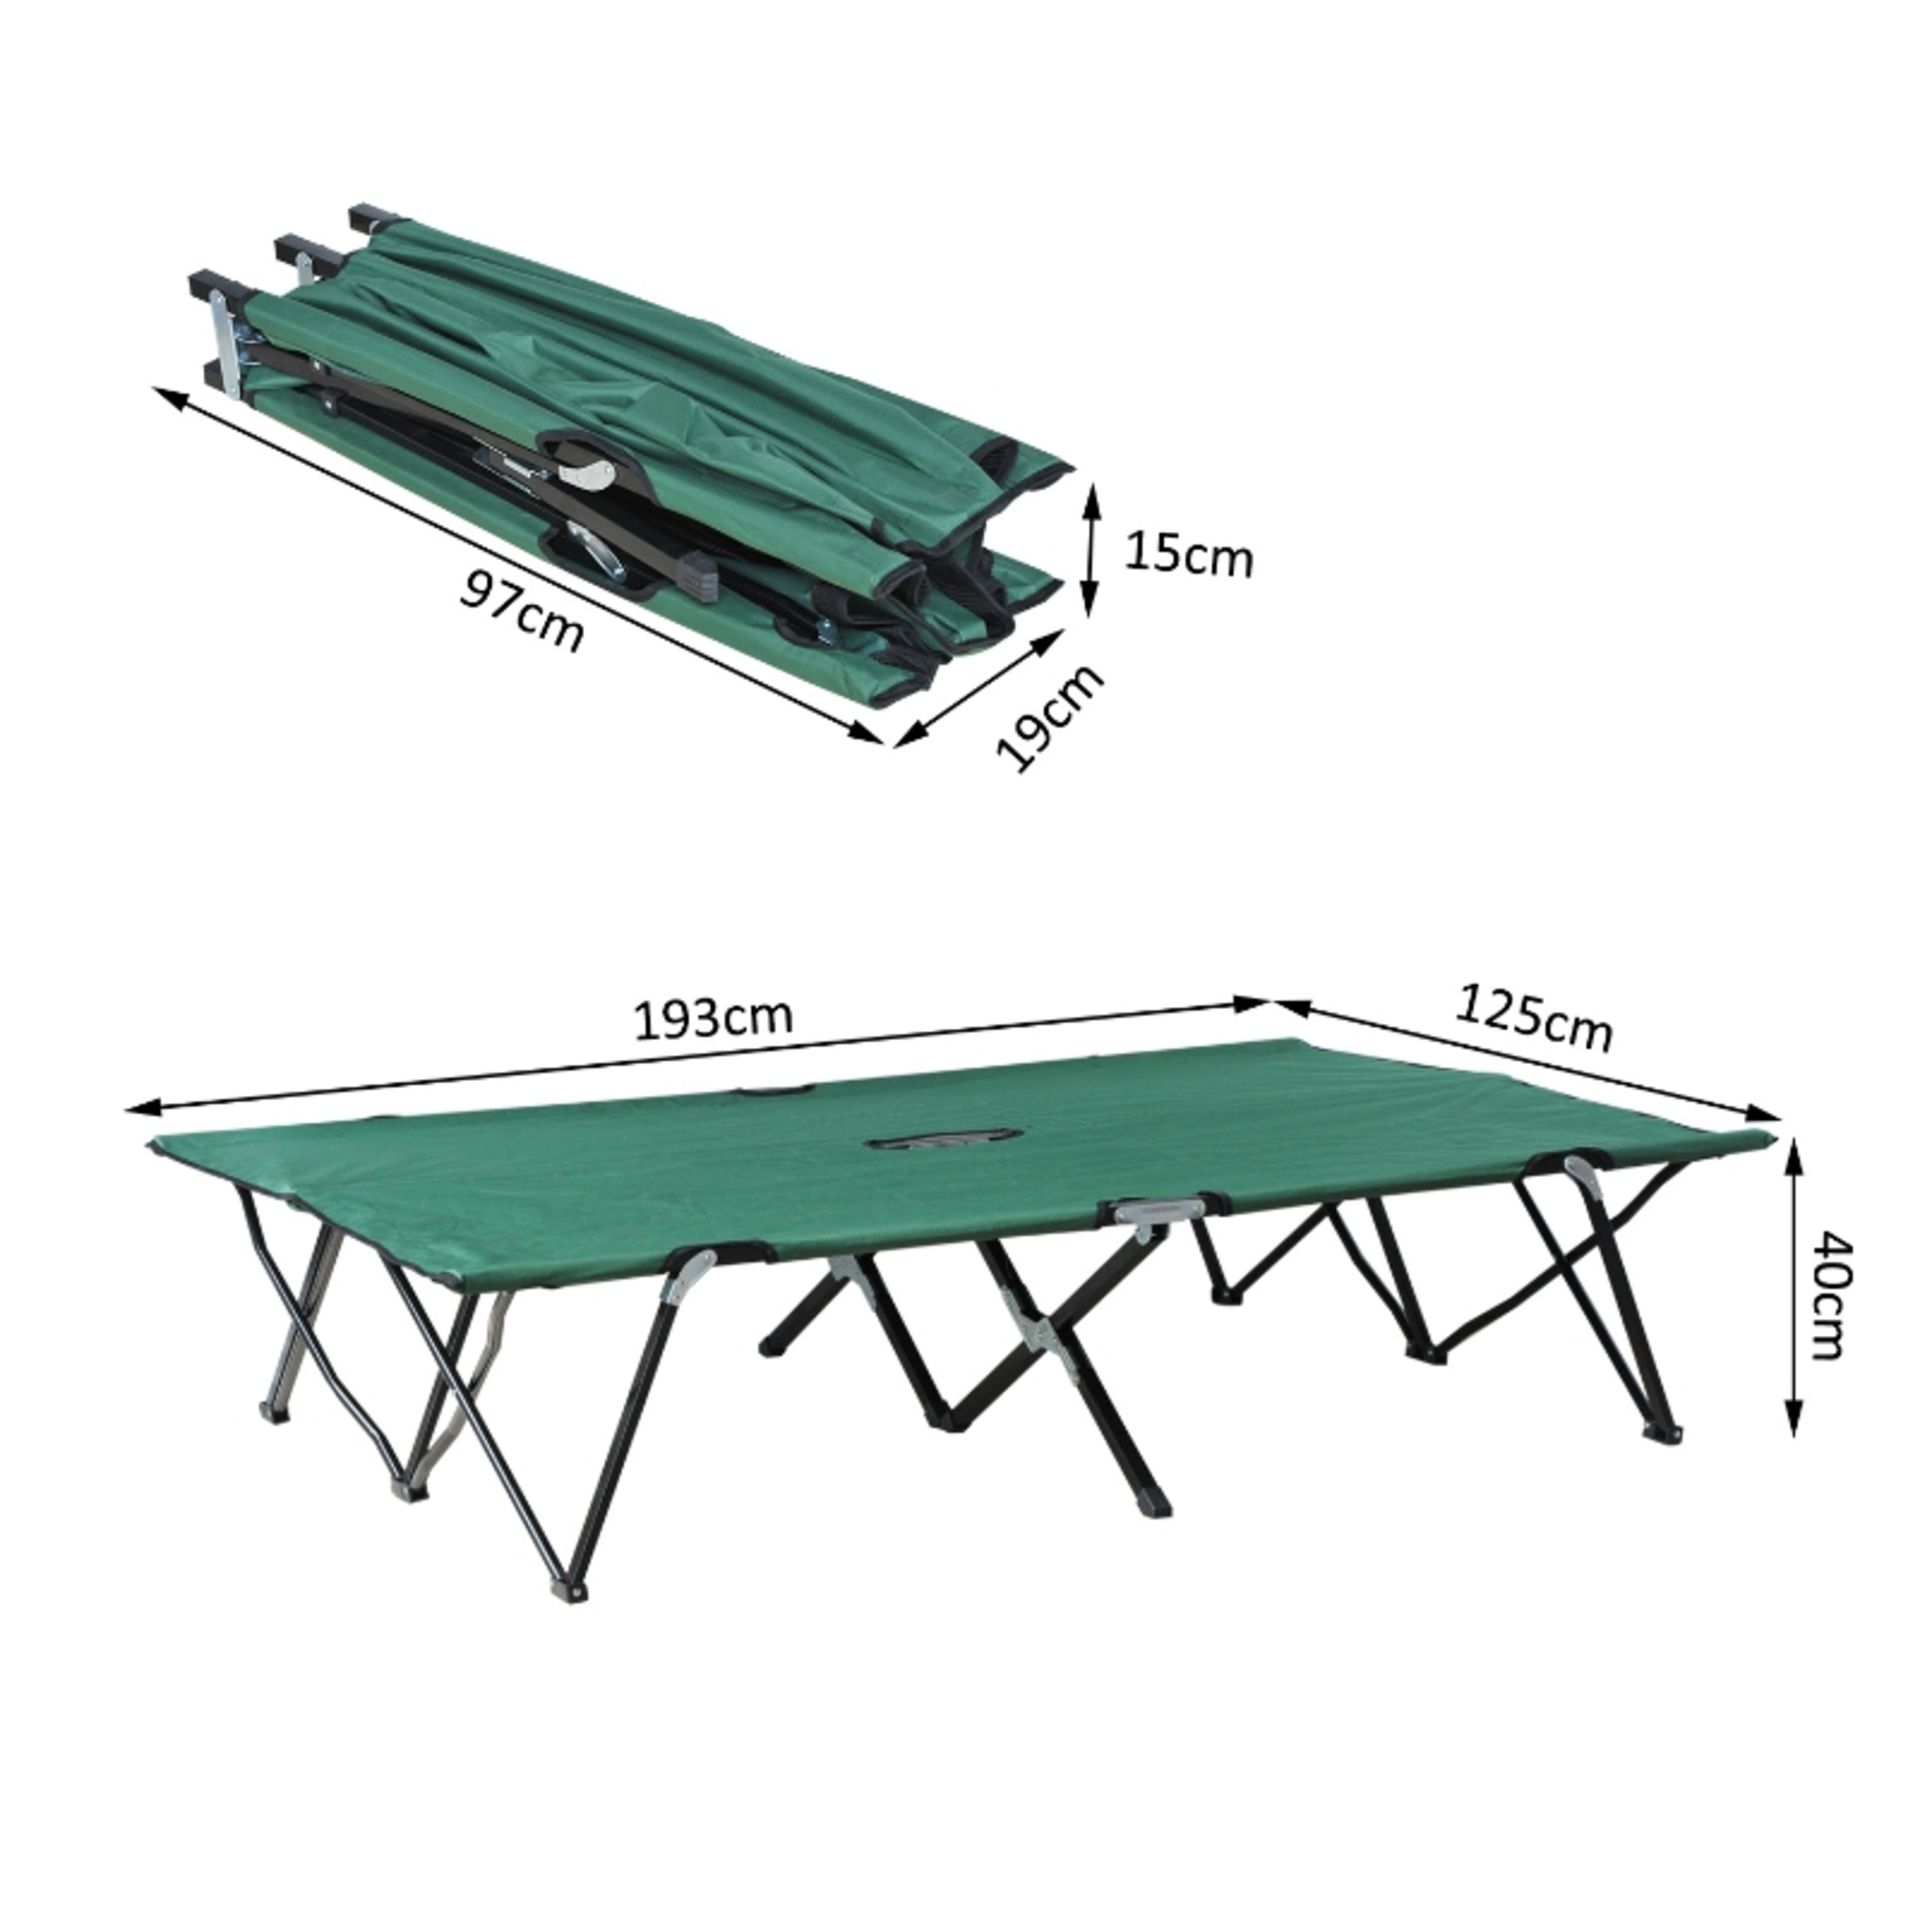 RPP £82.99 -Outsunny Double Camping Bed Camping Cot Foldable Sunbed Outdoor Patio Sleeping Bed Super - Image 3 of 5